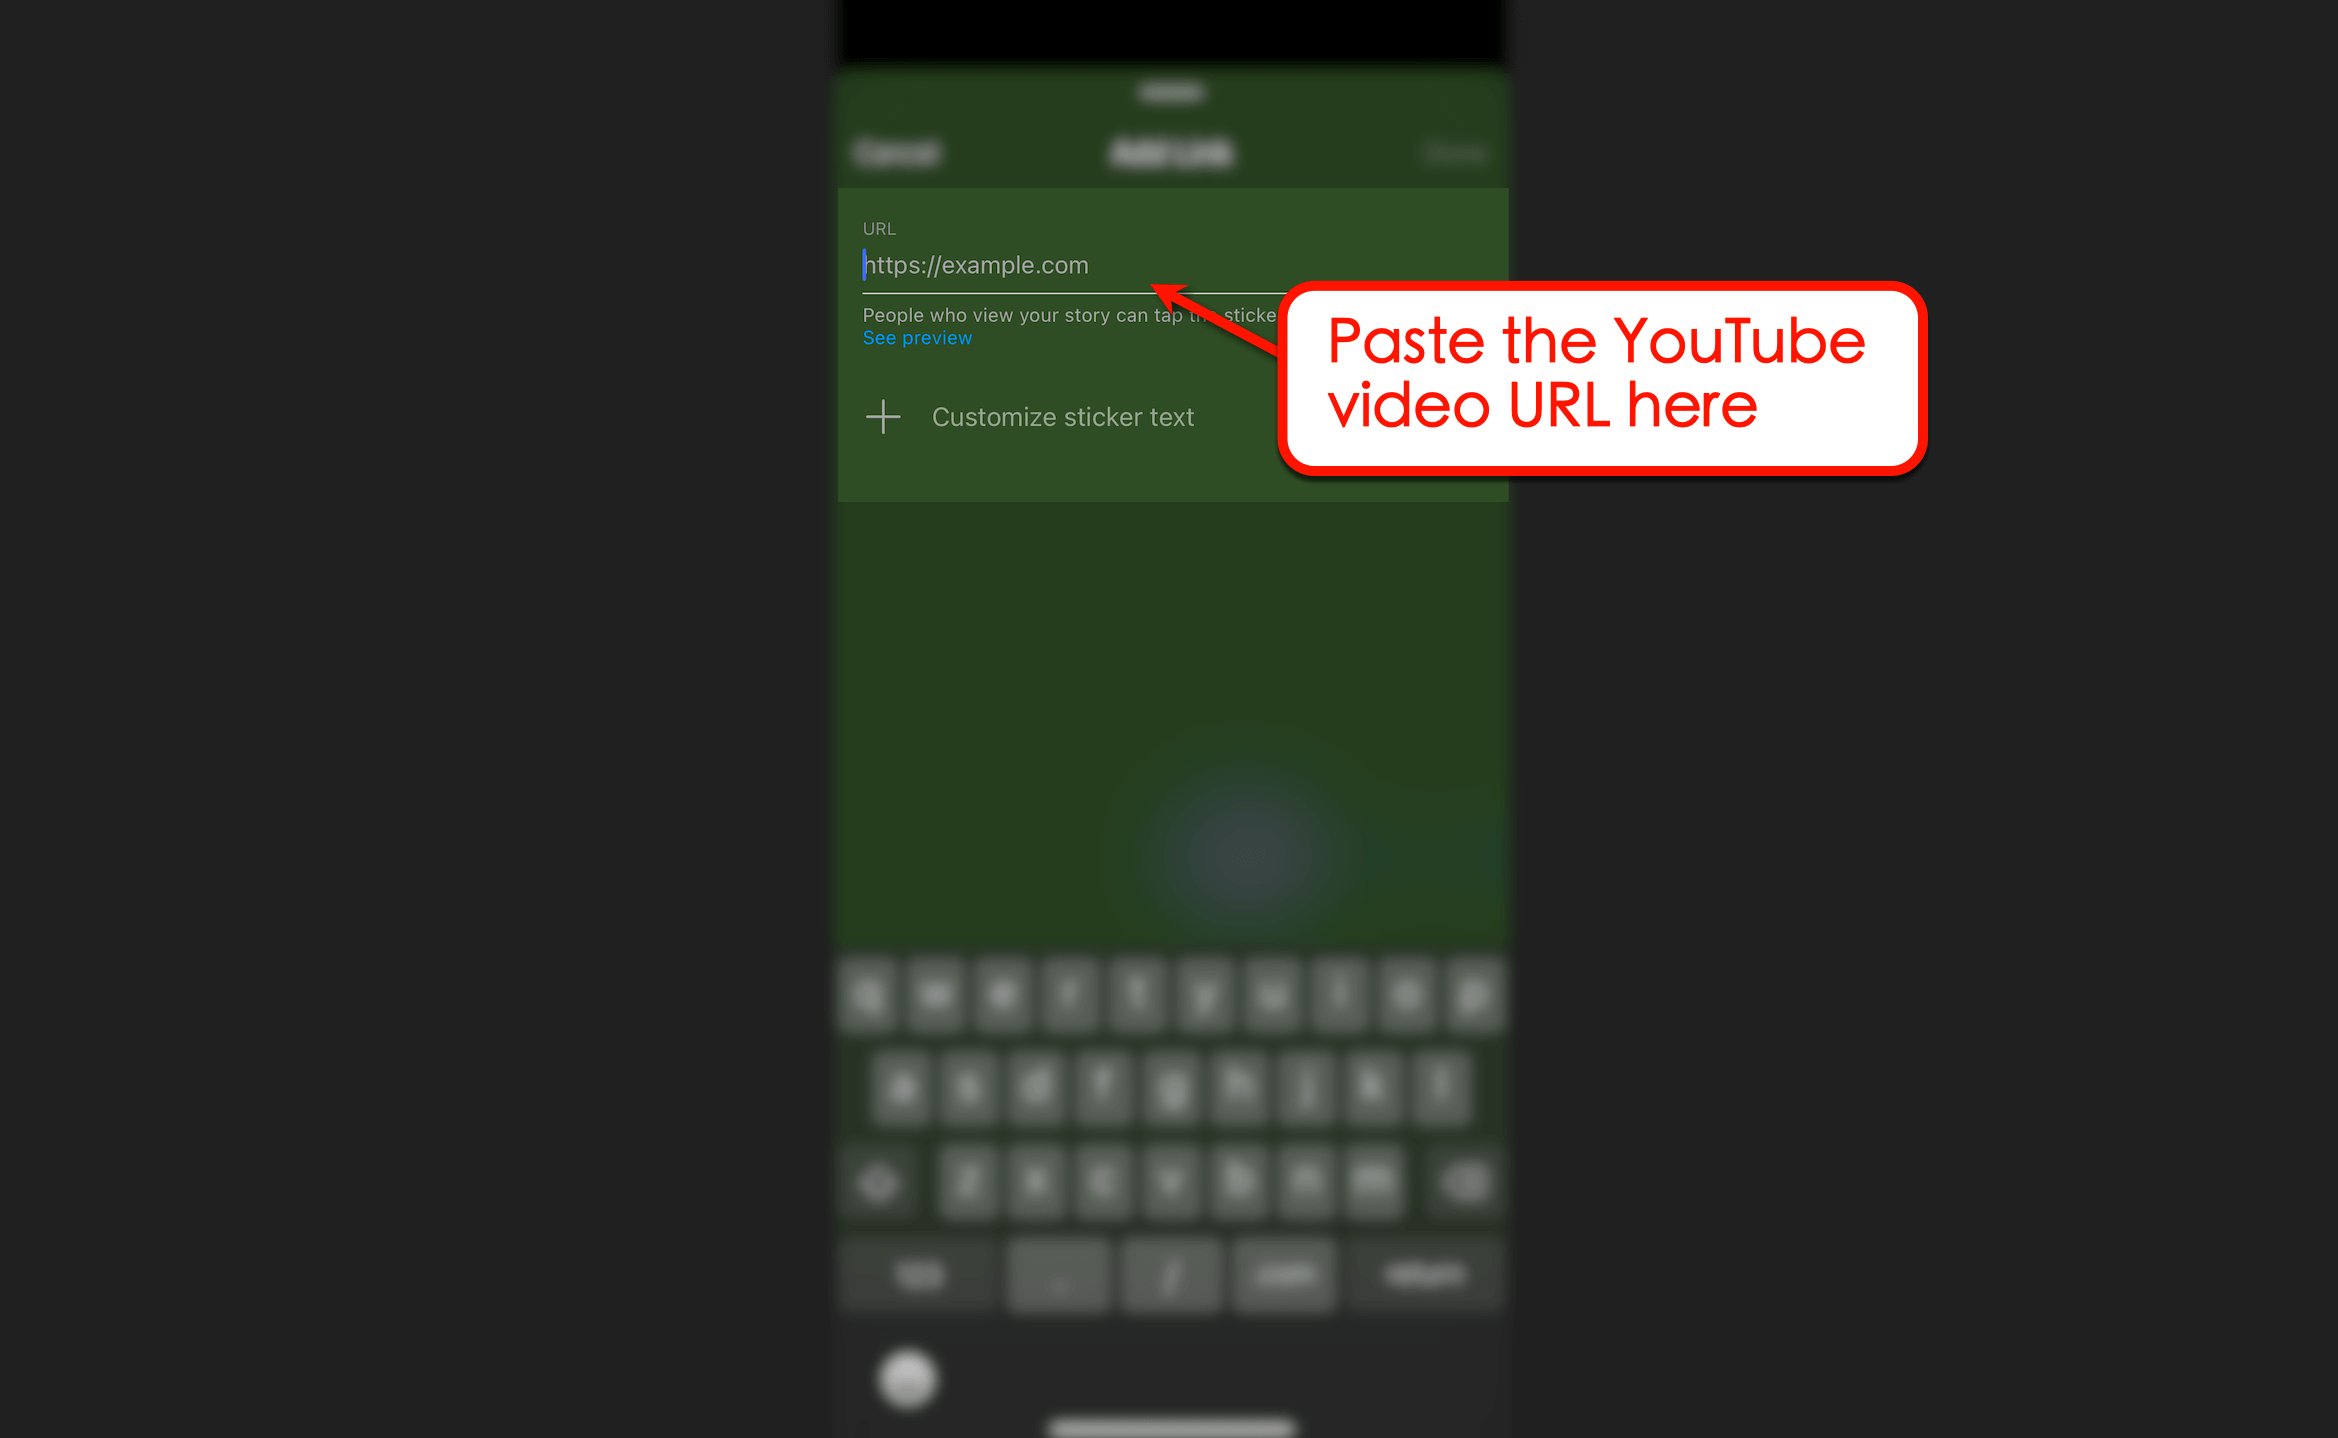 Paste the Youtube video URL